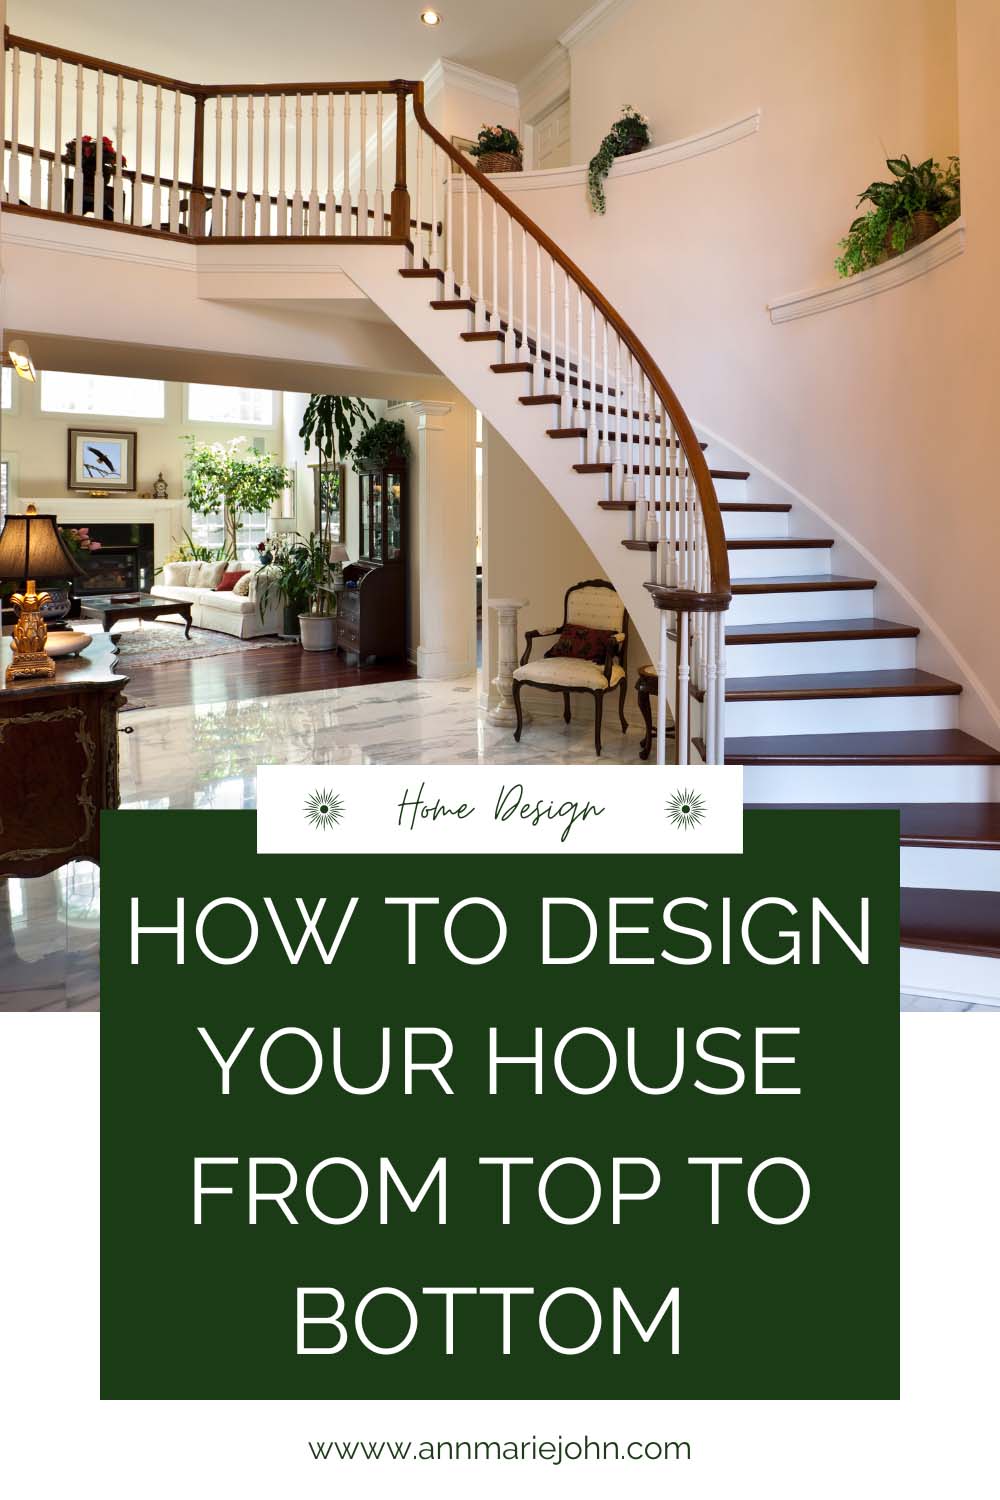 How To Design Your House From Top To Bottom